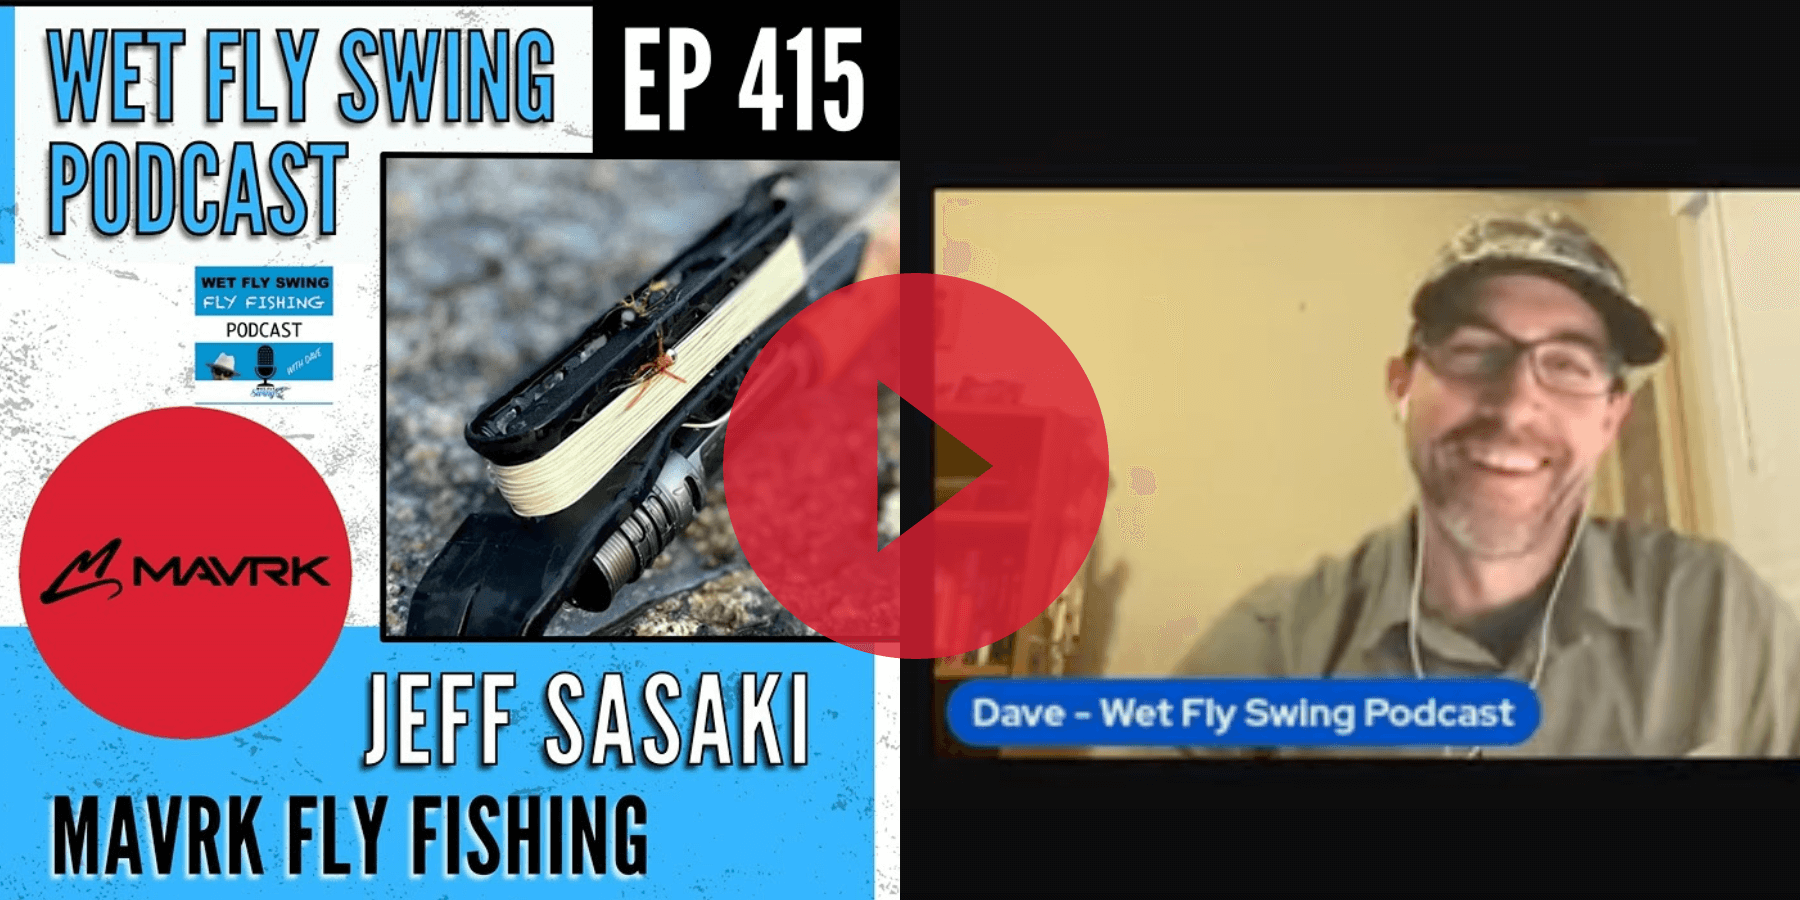 Wet Fly Swing Podcast  Episode #415 - Mavrk Fly Fishing with Jeff Sasaki Euro Nymphing, Stinger Reel, Truckee River